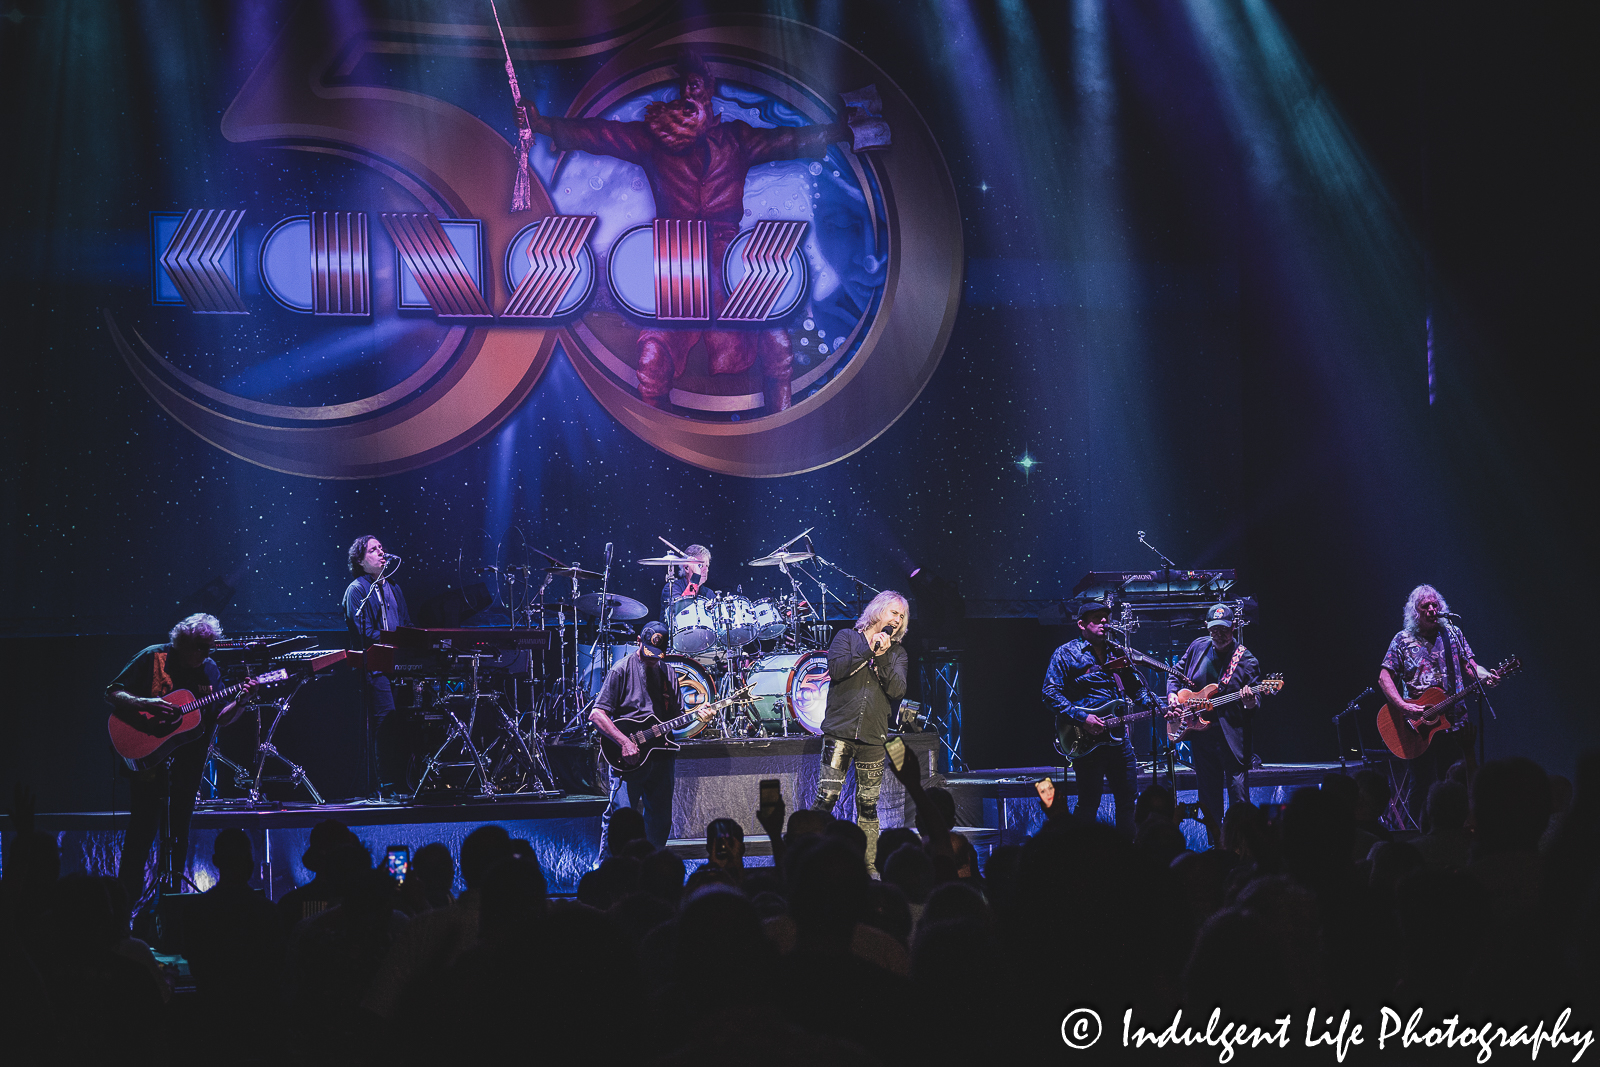 Rock band Kansas performing "Hold On" with founding members Kerry Livgren and Dave Hope making special guest appearances at The Midland in Kansas City, MO on July 27, 2023.